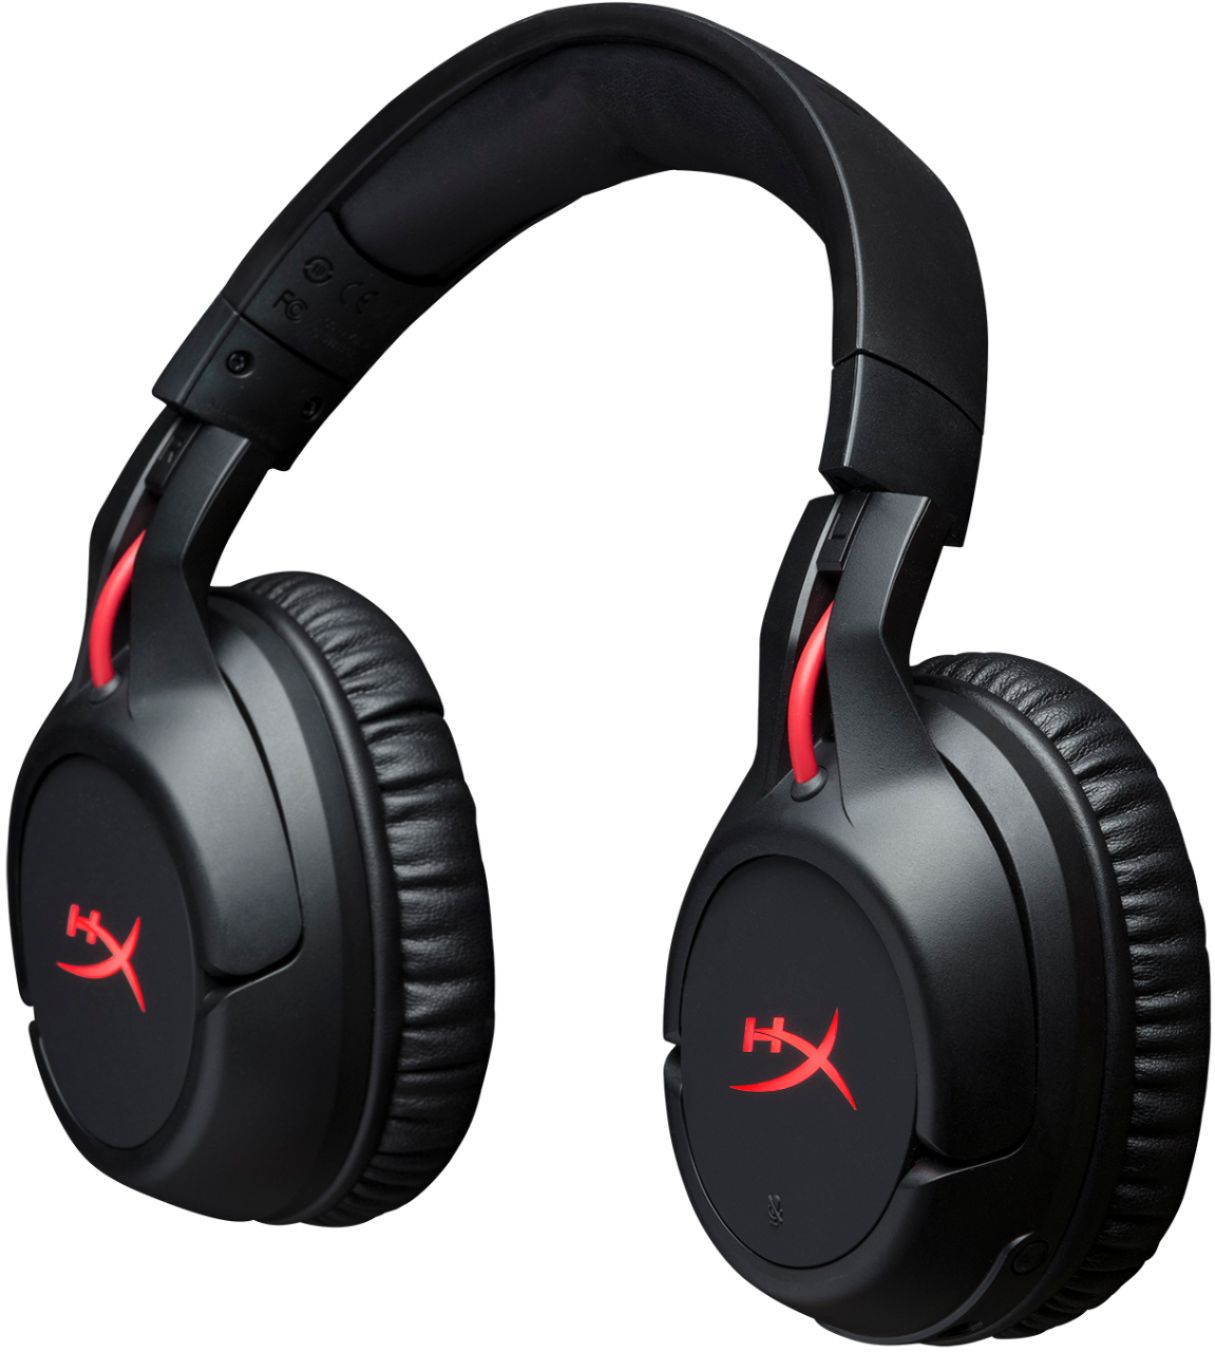 HyperX Cloud Flight PS4 - PS5, and Headset for Gaming Best Buy Black Wireless PC, 4P5L4AA#ABL/HX-HSCF-BK/AM